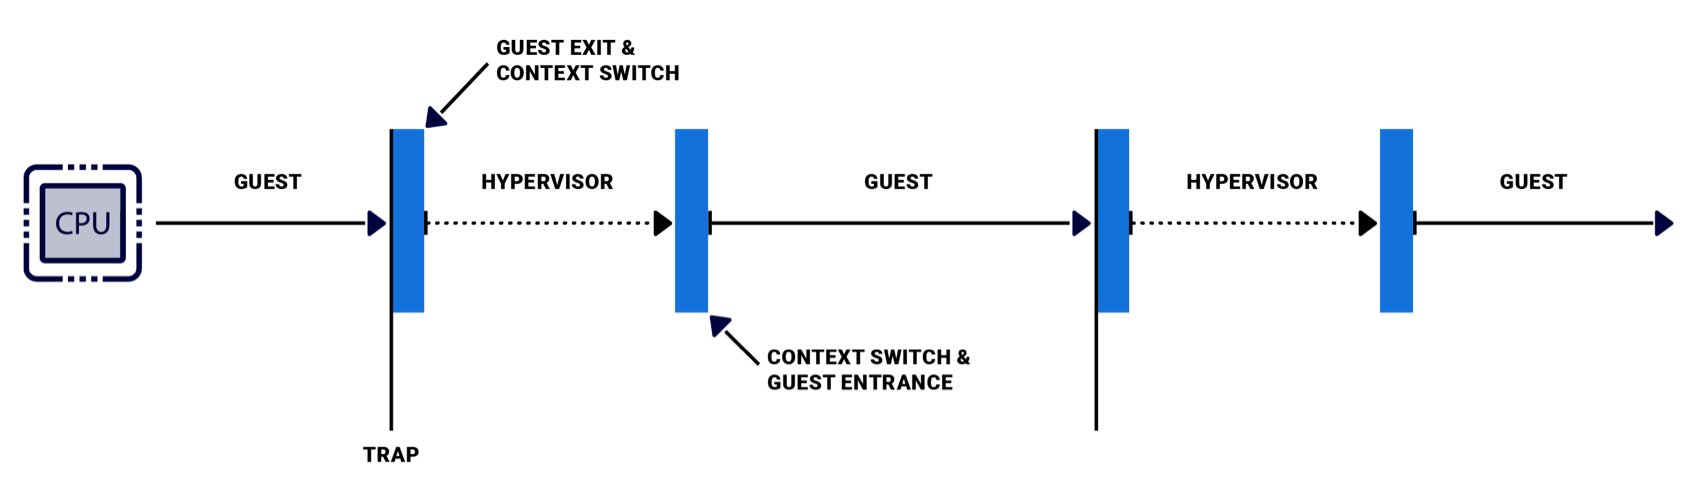 Figure 3: Execution in a hypervisor system alternates between the hypervisor and its guests. On a trap, the hypervisor manages the guest exit, saving the guest's context, then restoring it before the guest entrance.